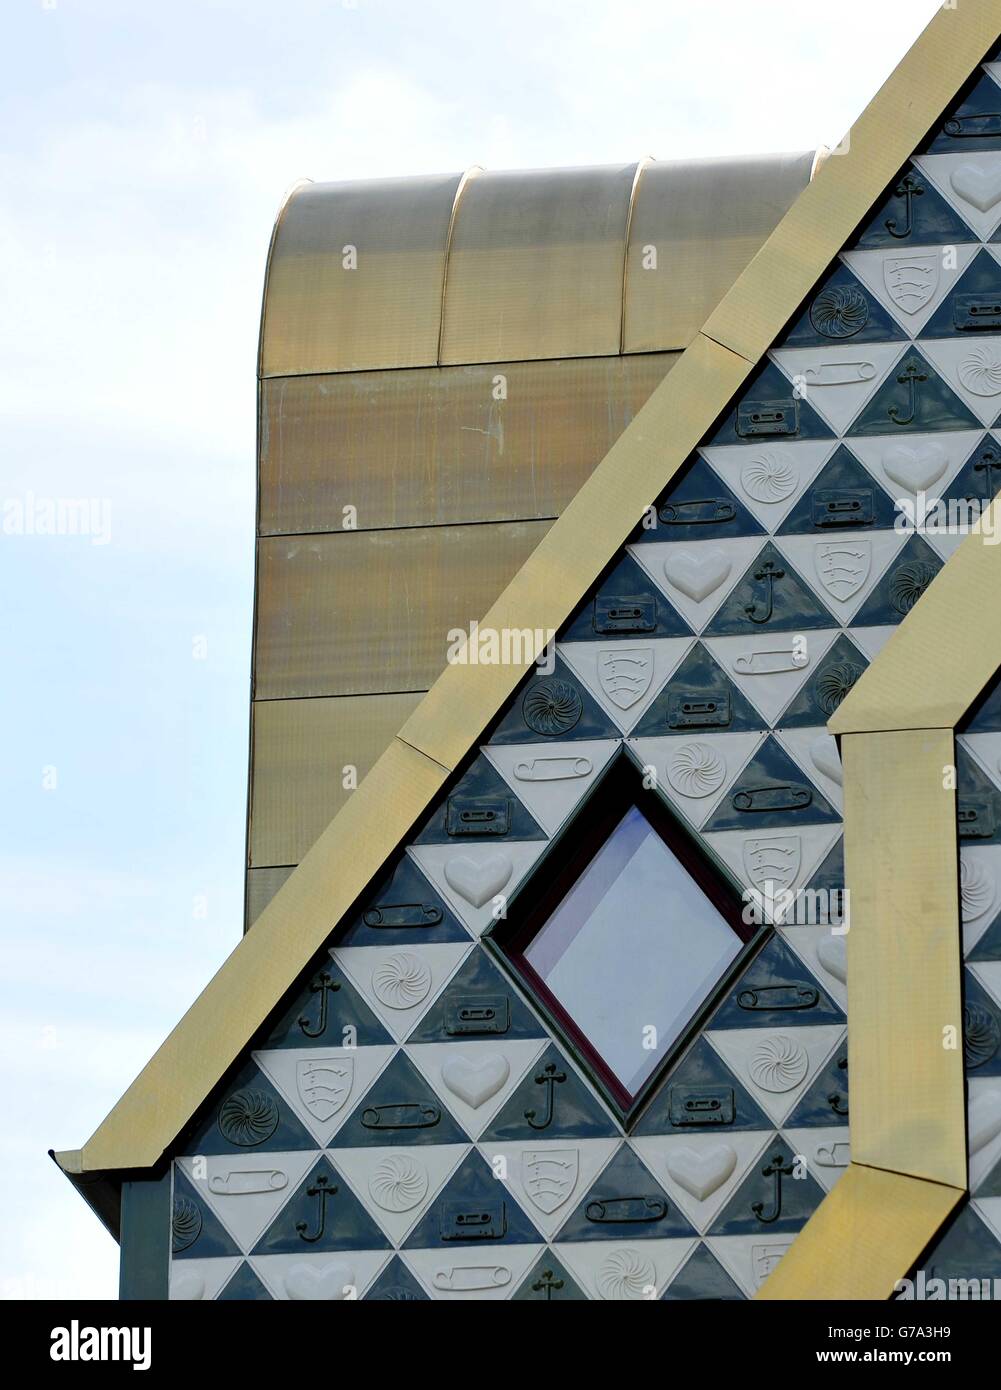 A view of the gold coloured structure and of tiles showing a cassette tape, the Essex Coat of Arms, a safety pin, a heart, a wheel pattern and a crossed hook, on the outside of 'Home for Essex' a new art project by artist Grayson Perry, under construction in Wrabness, Essex. Stock Photo